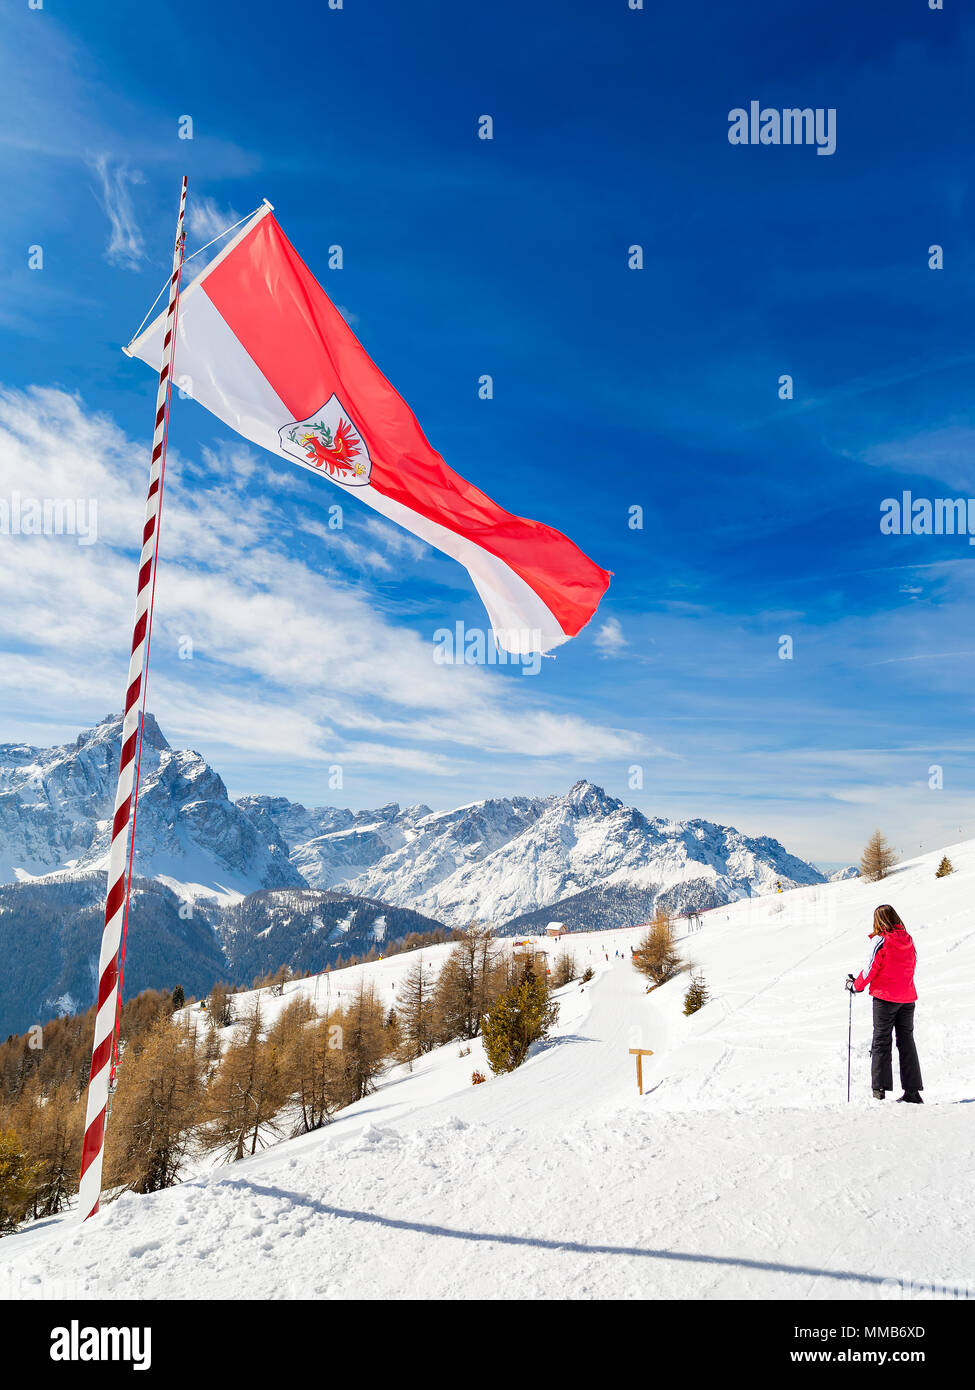 Austrian flag fluttering in front of the Italian Alps, Monte Elmo, Italy Stock Photo